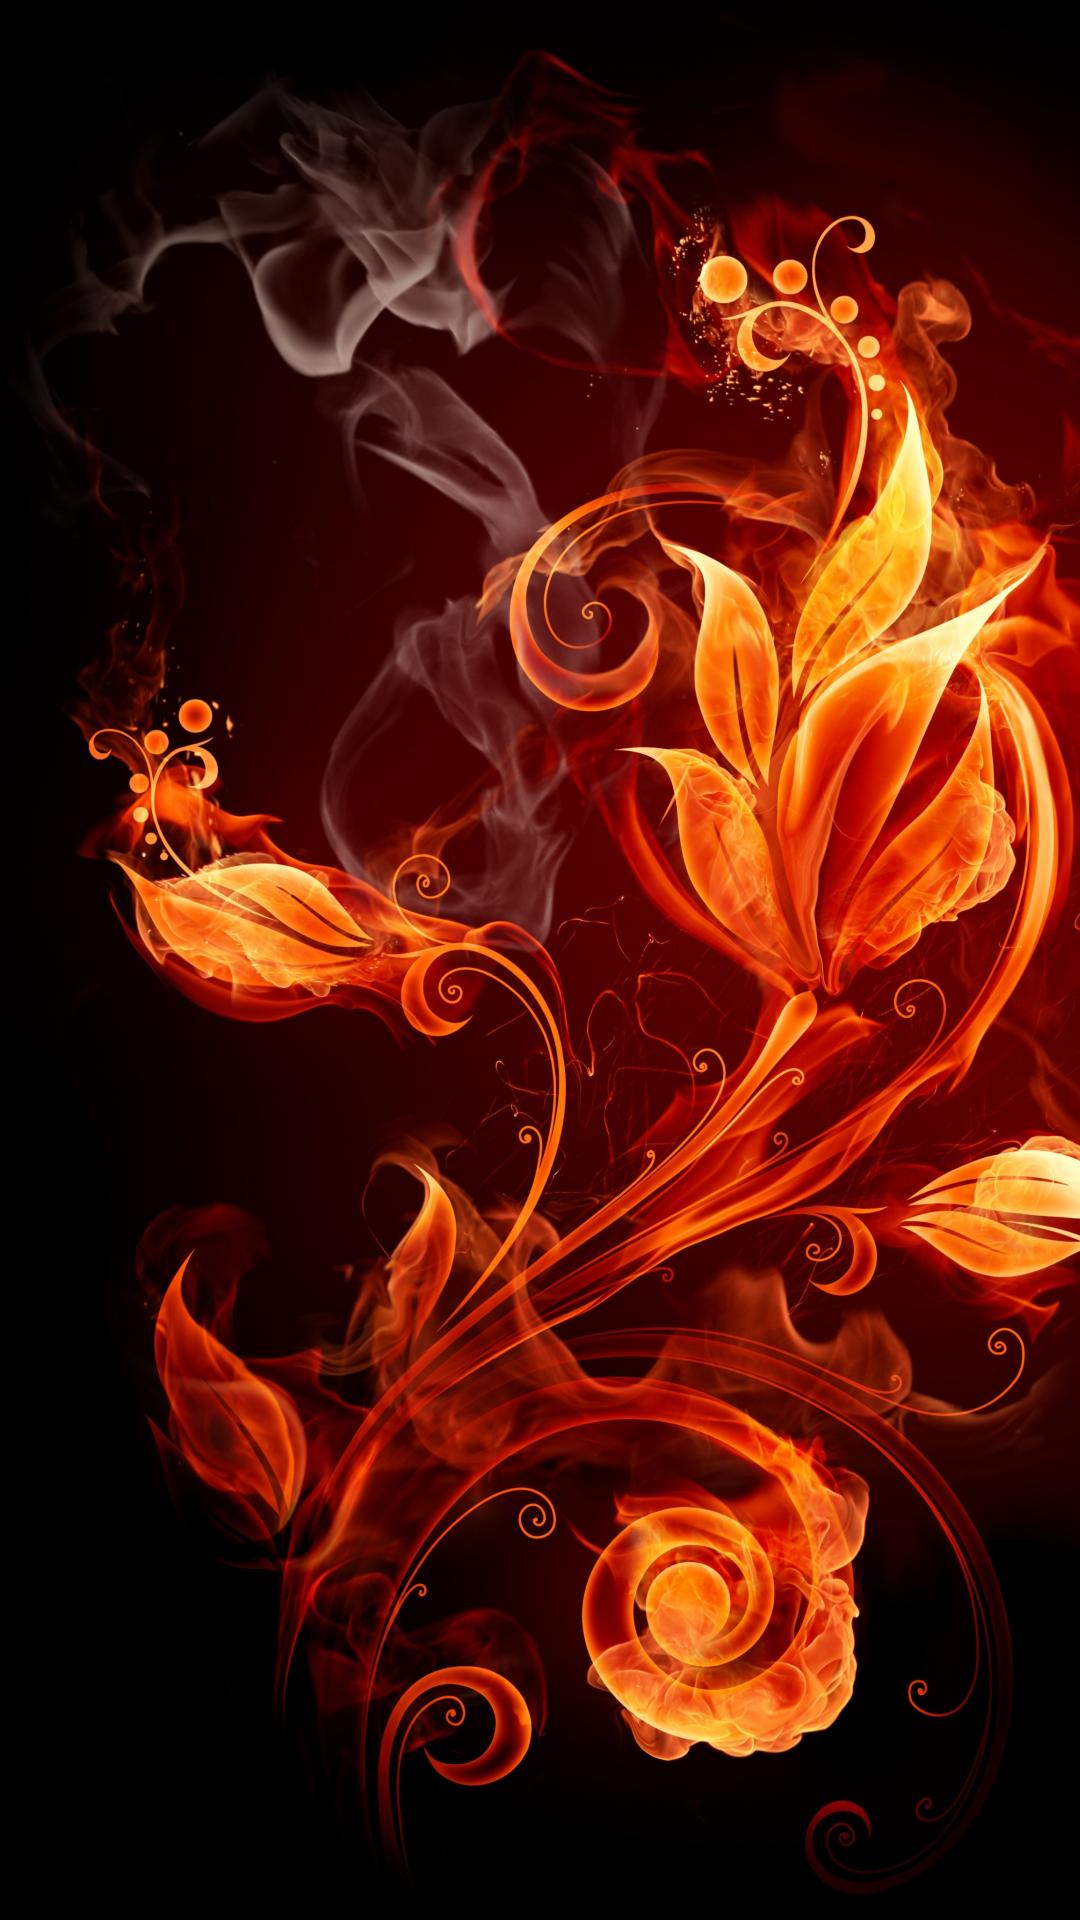 Flaming Flower Wallpapers - 4k, HD Flaming Flower Backgrounds on ...